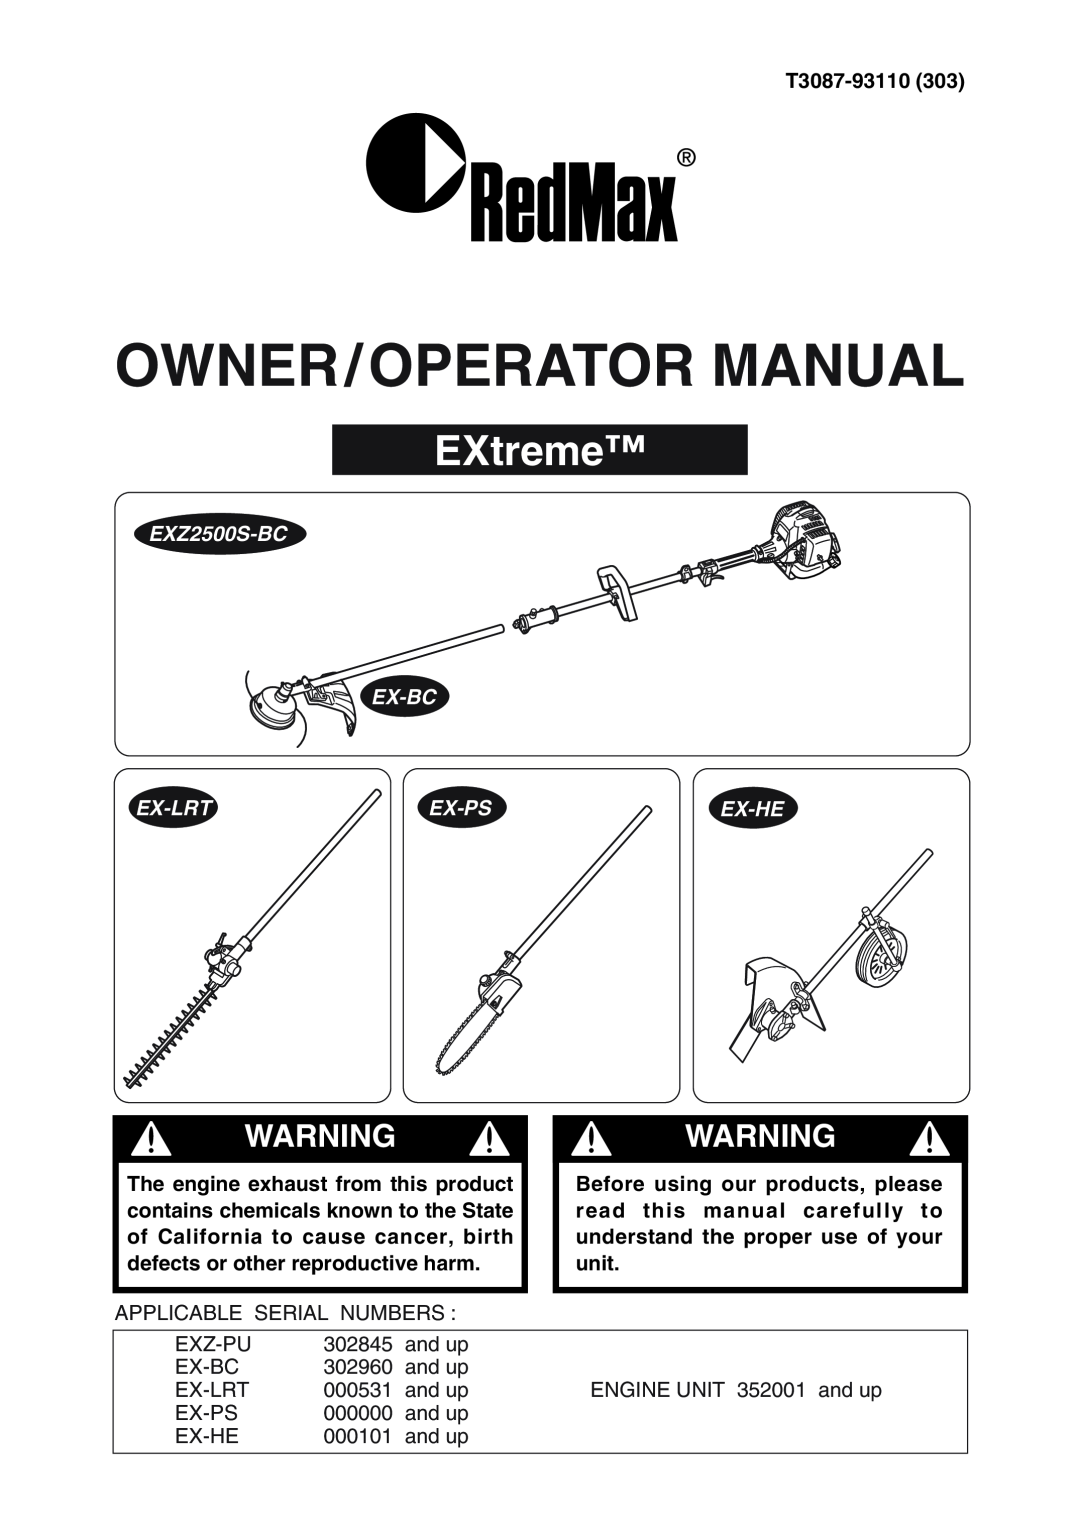 RedMax manual EXtreme, EXZ2500S-BC EX-BC, Ex-Lrt, Ex-Ps, Ex-He, Owner/Operator Manual, Warning Warning 